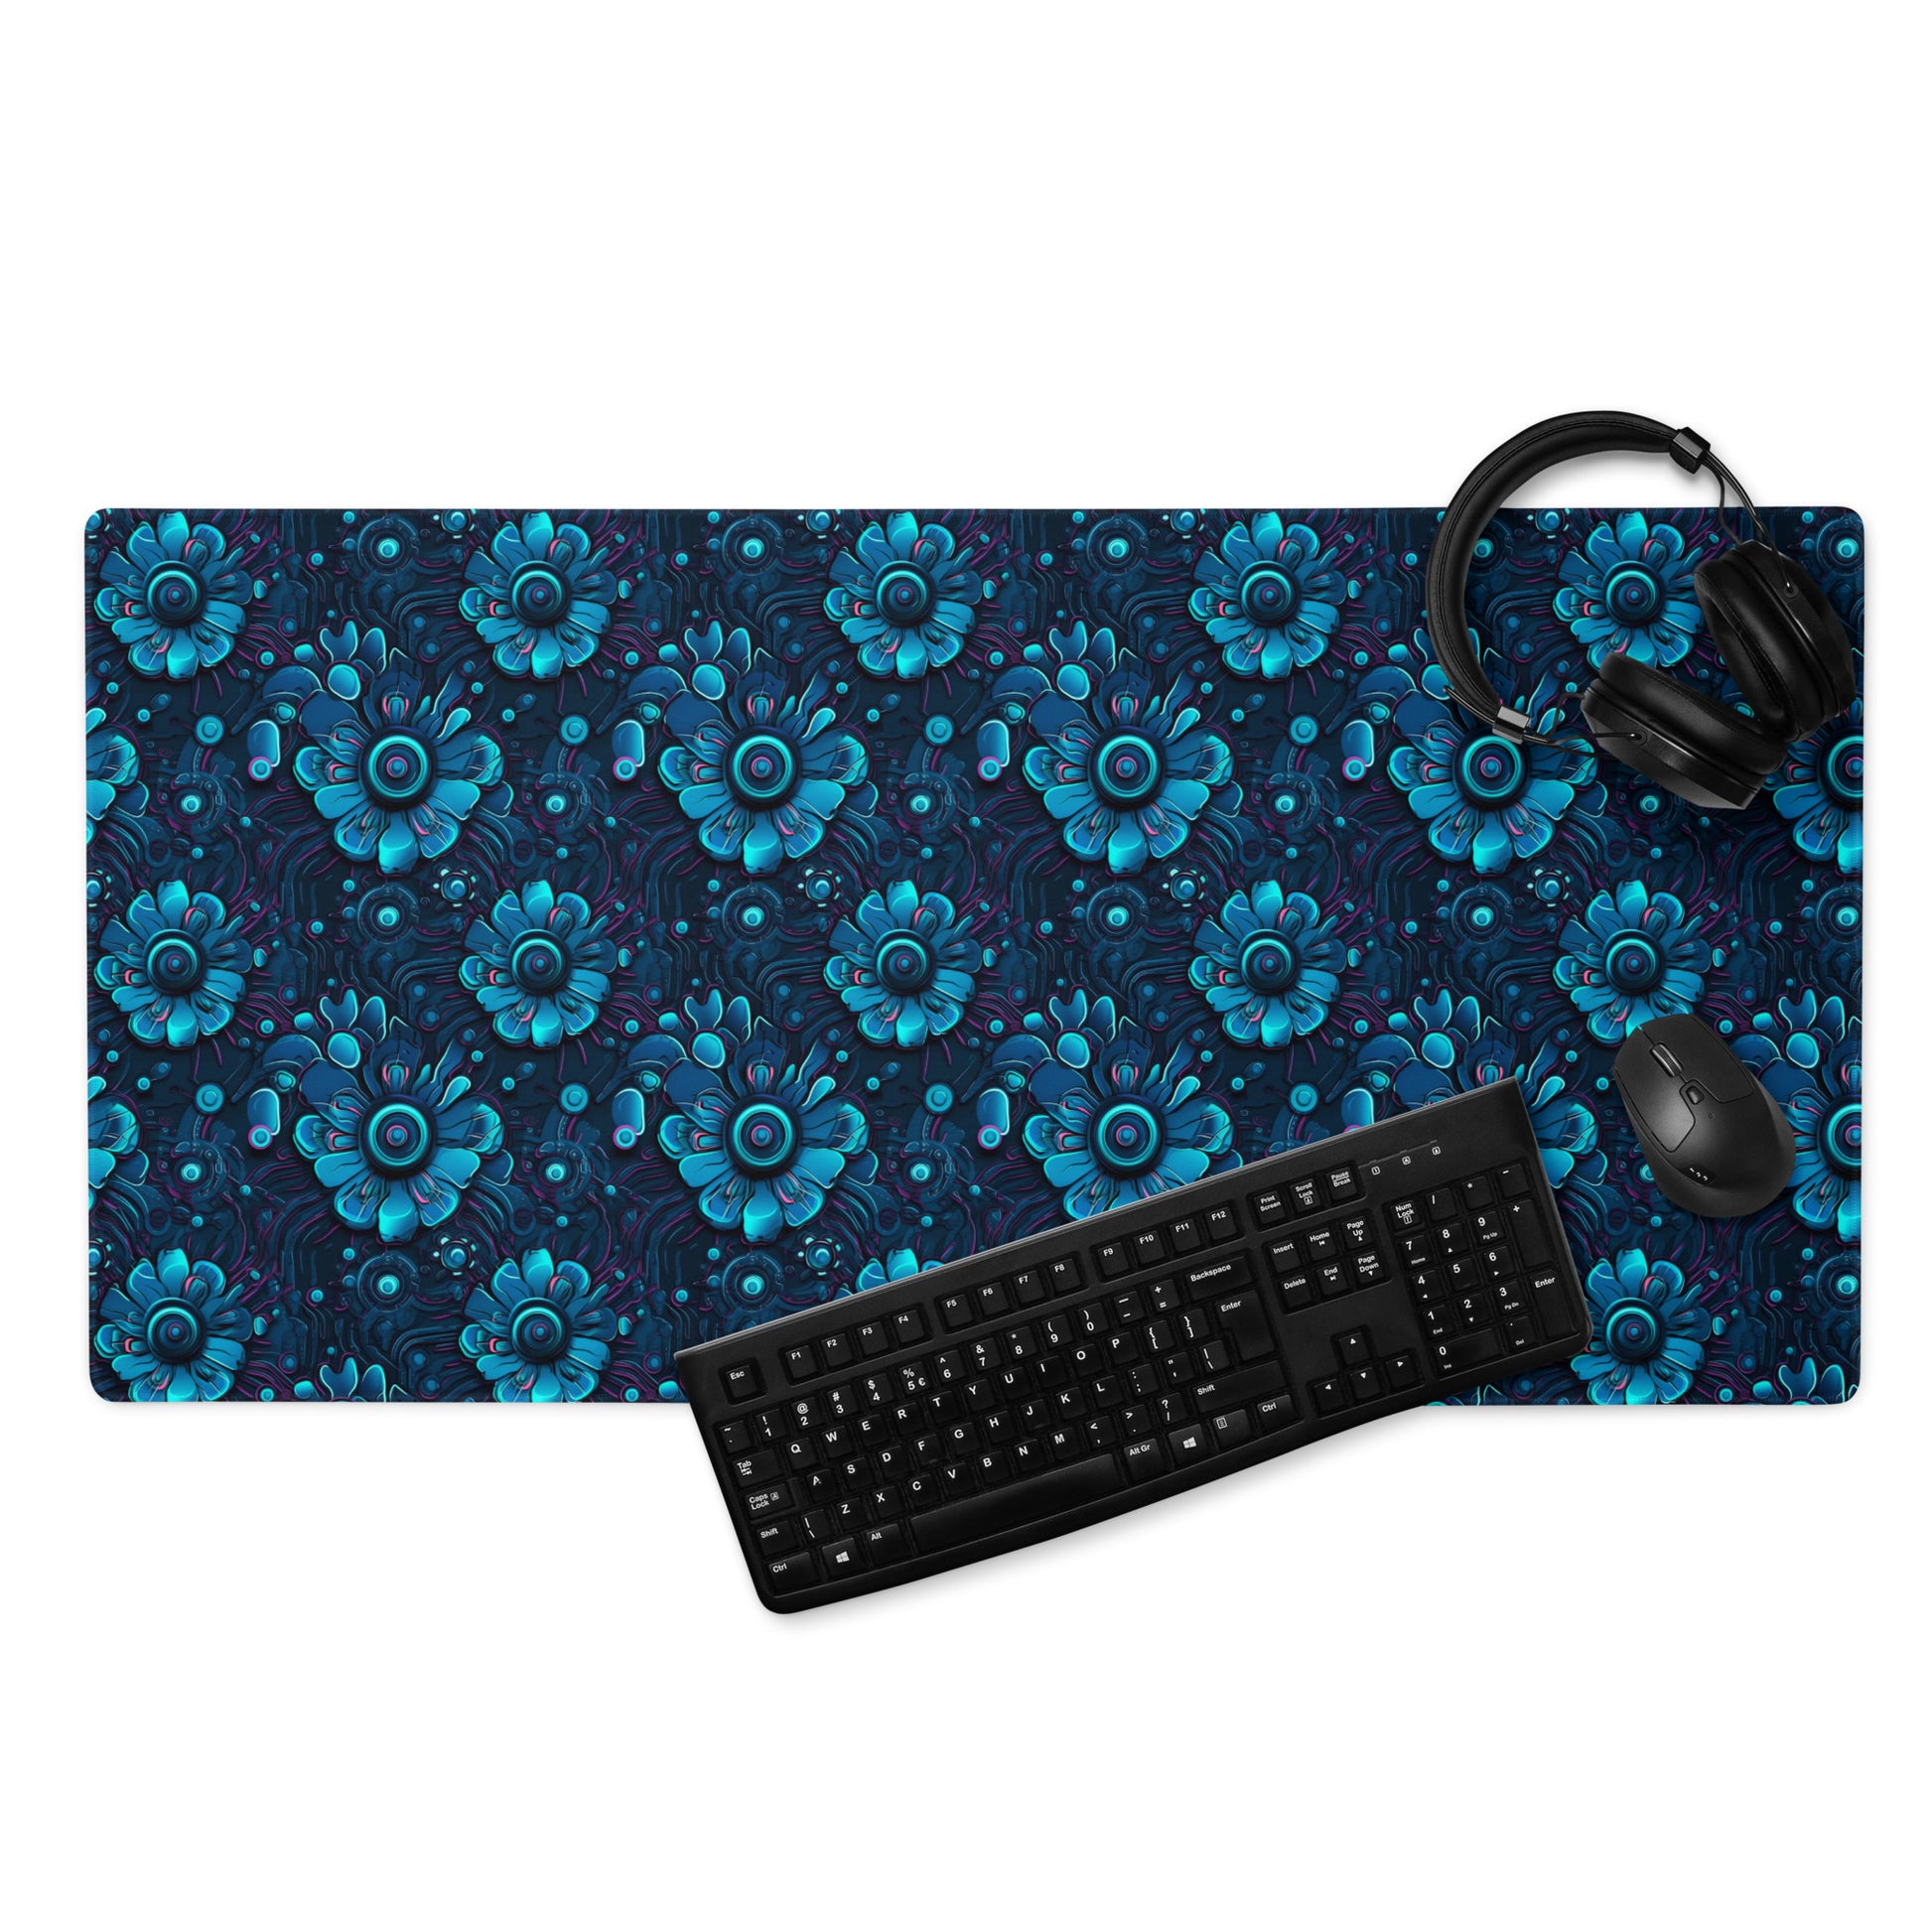 A 36" x 18" desk pad with a blue robotic floral pattern. With a keyboard, mouse, and headphones sitting on it.